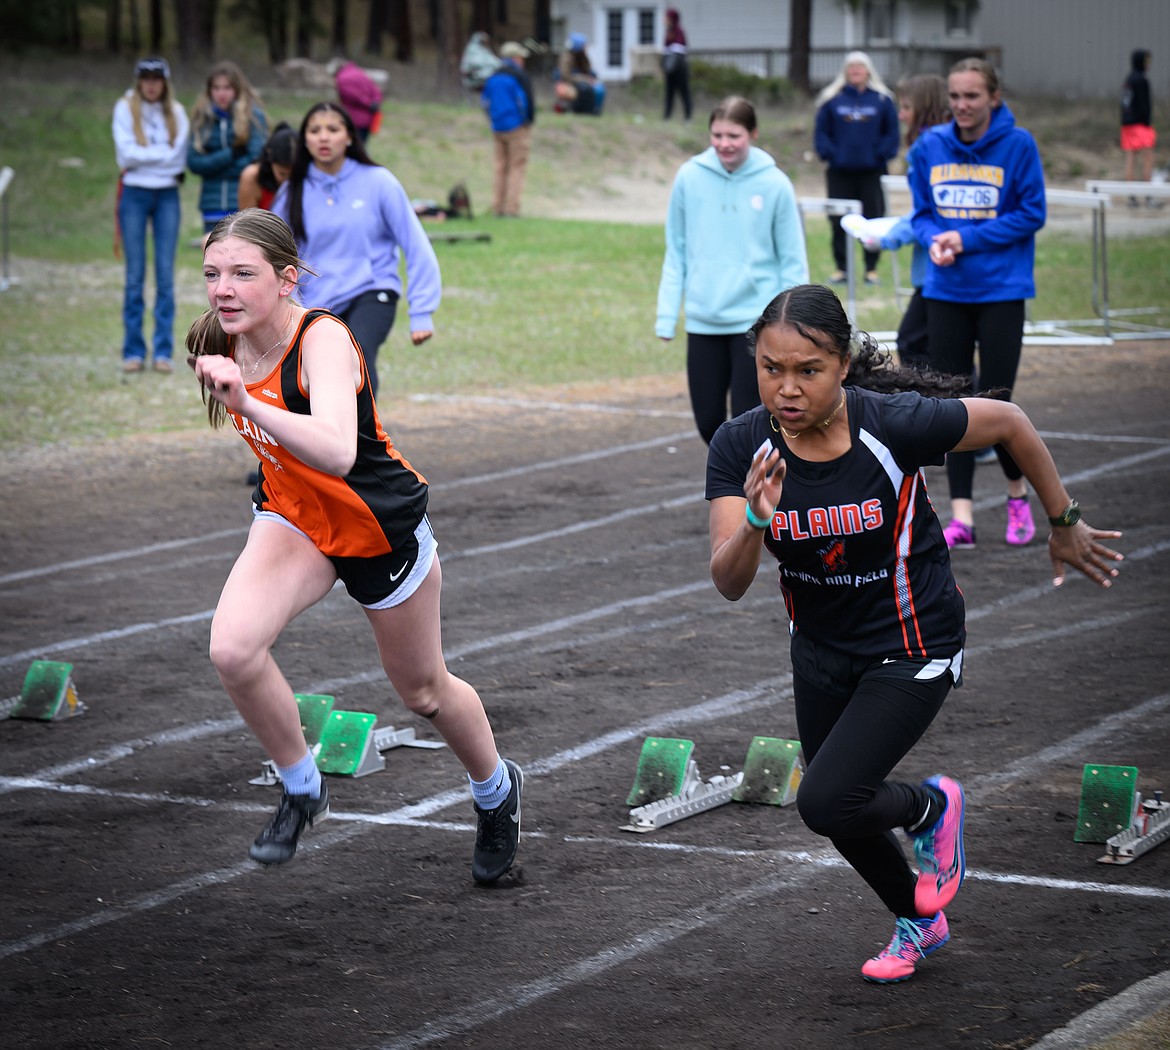 Plains sprinters Amy Hill (left) and Aly Roy give it their all in the 100 meter sprint event at this past week's Thompson Falls Invitational.  (Photo by Tracy Scott)